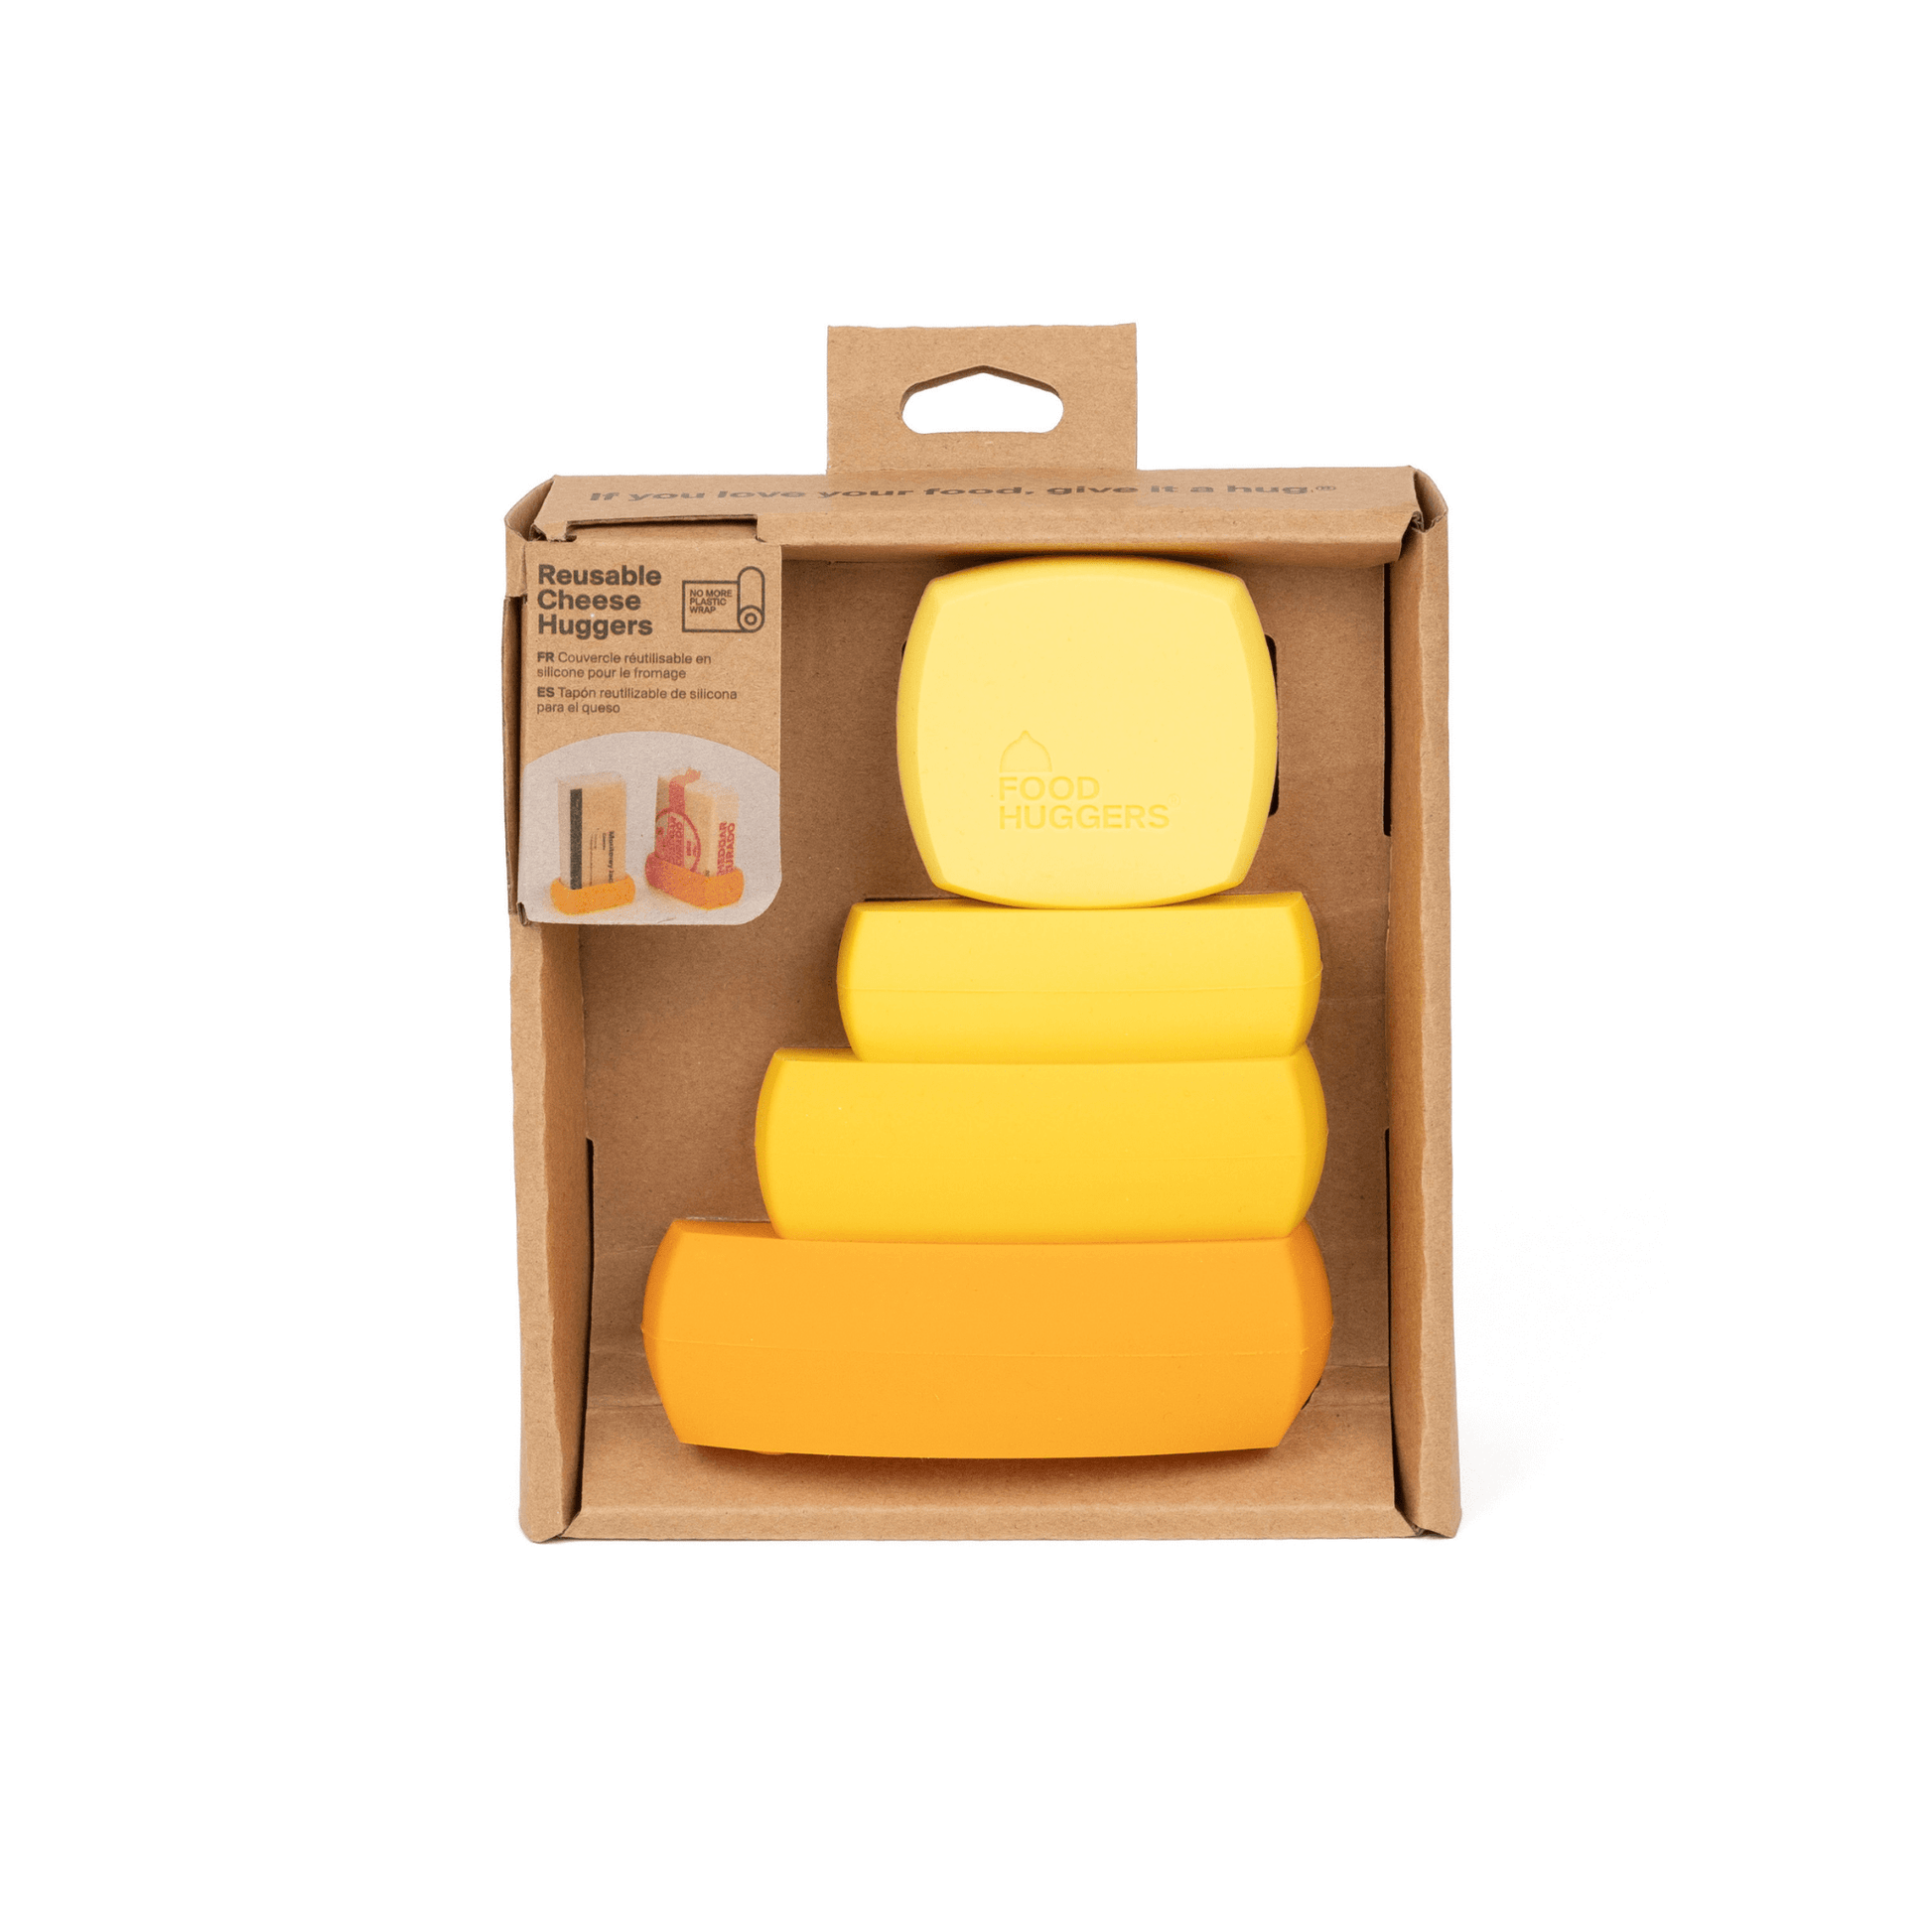 Bundle of five reusable Cheese Huggers in their packaging, the perfect alternative to plastic wrap